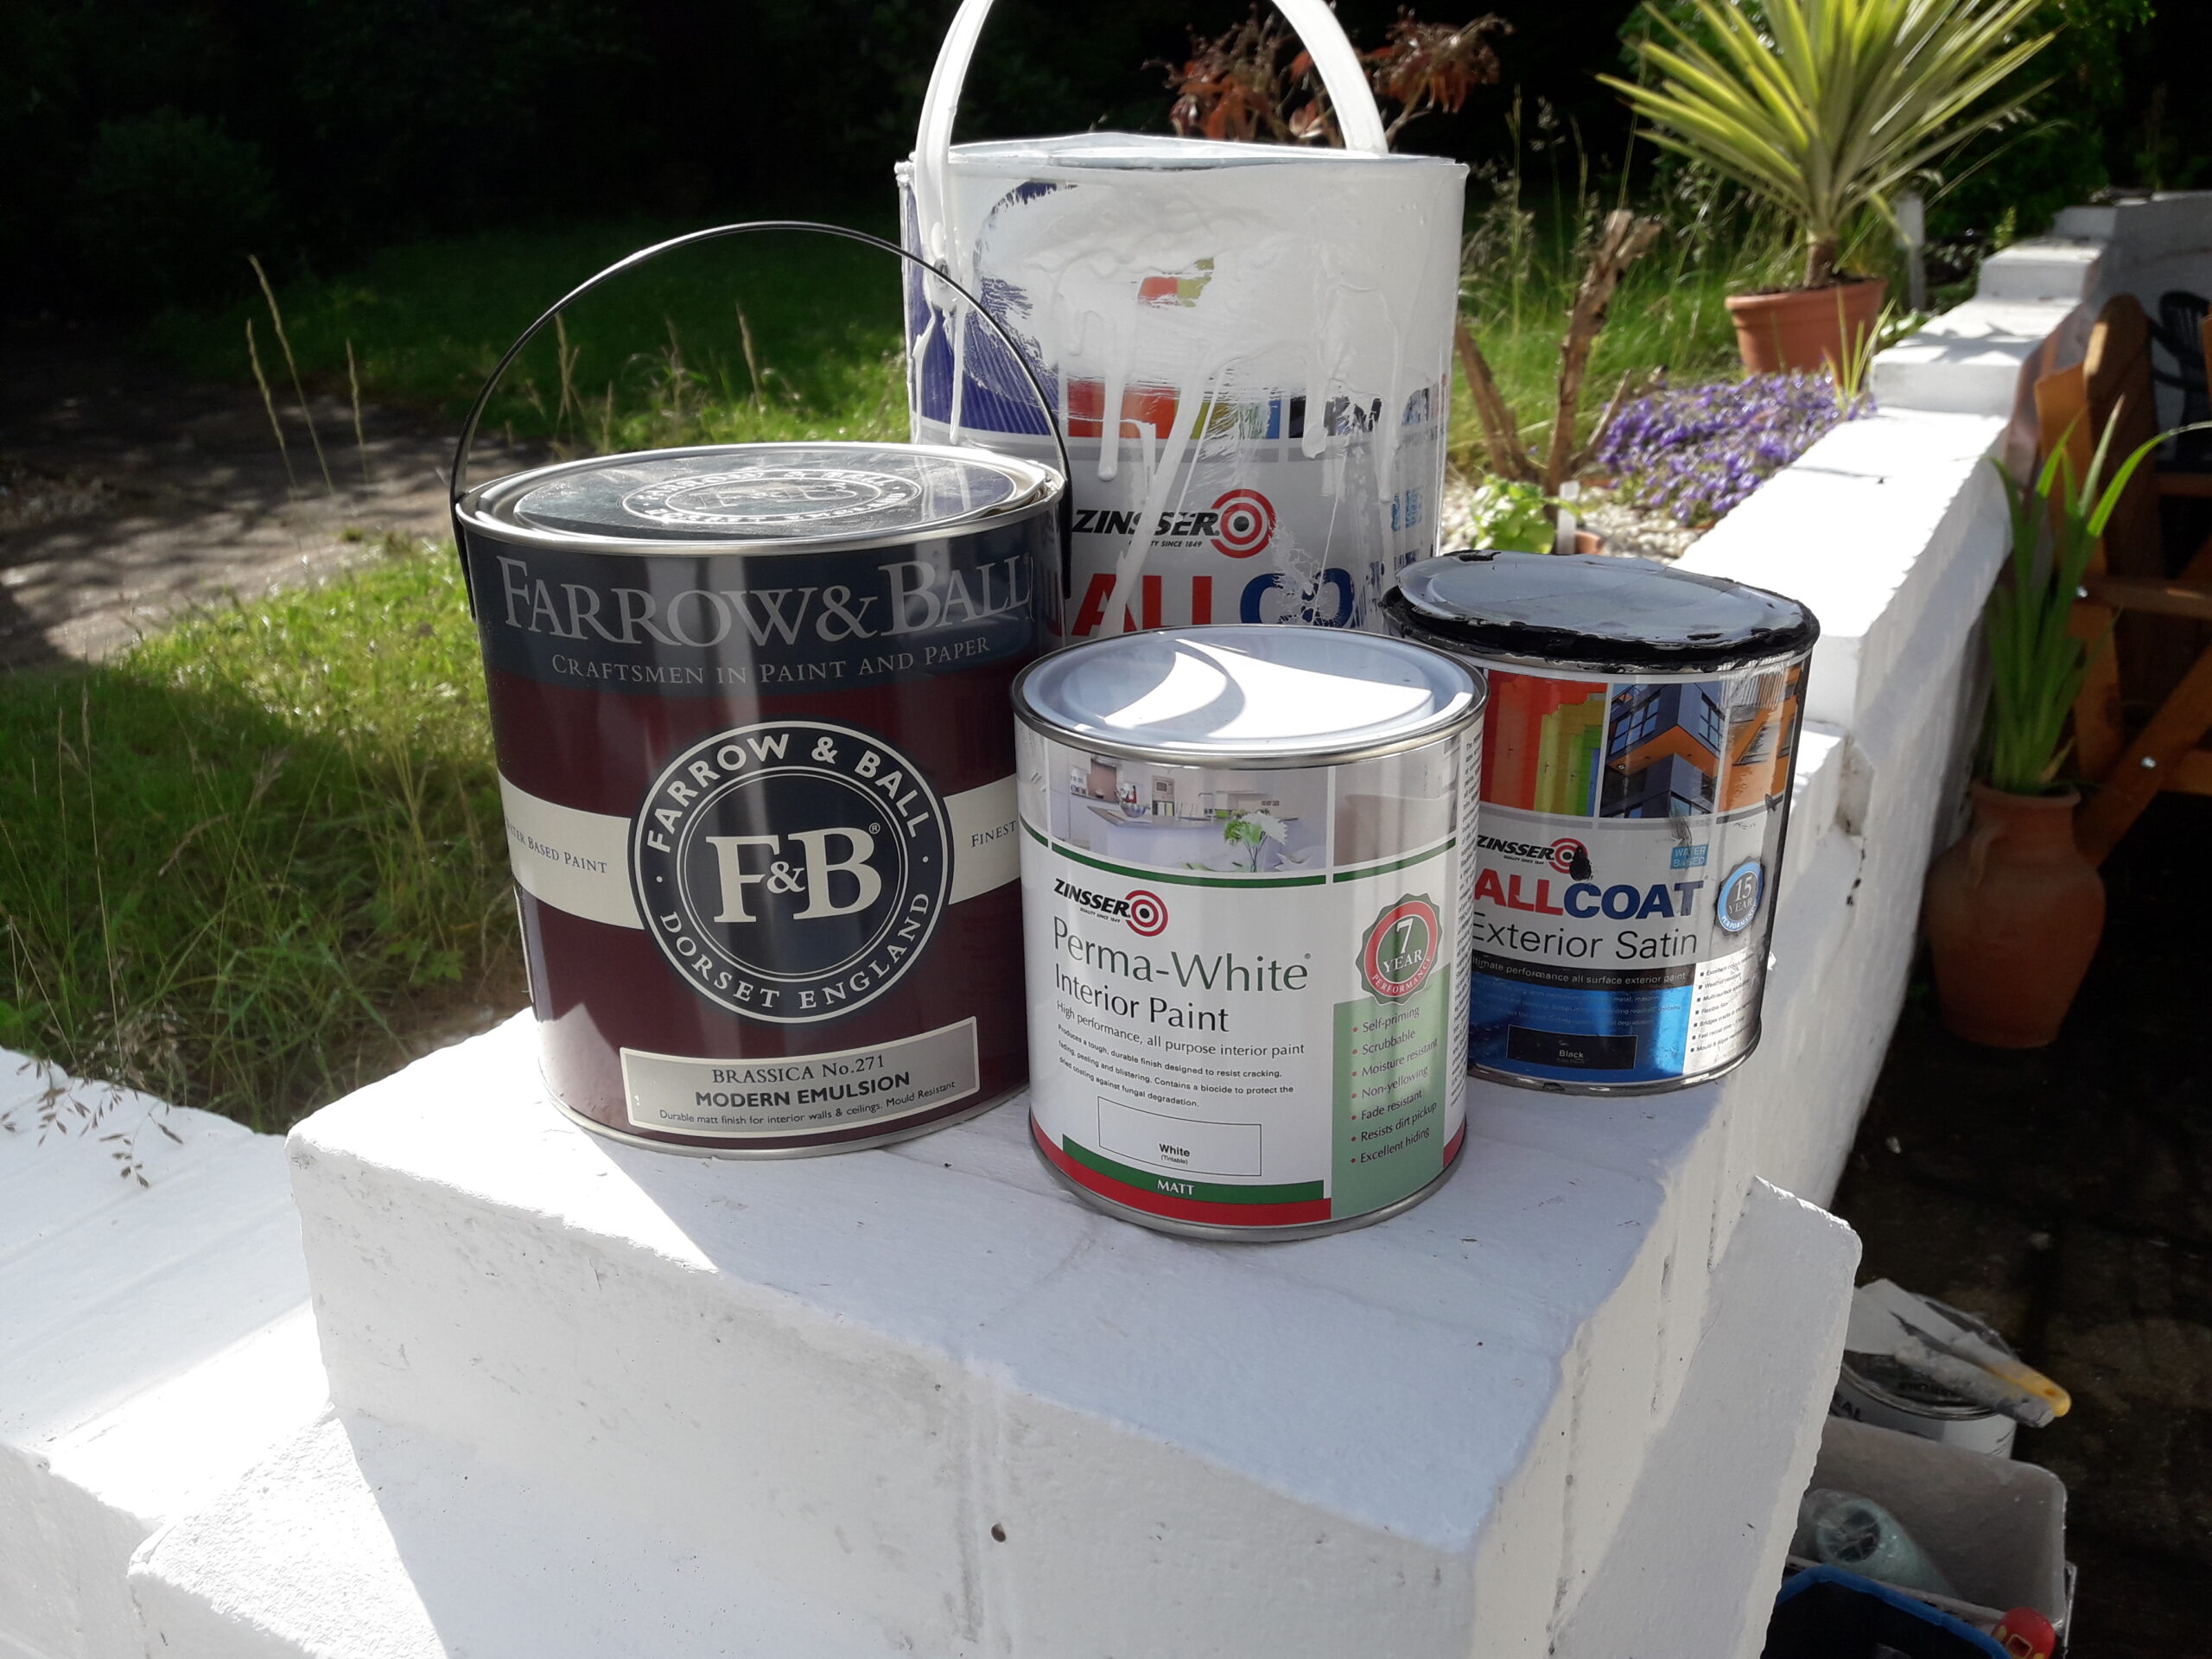 brands of paint we use here at freshlook for interior decorating works